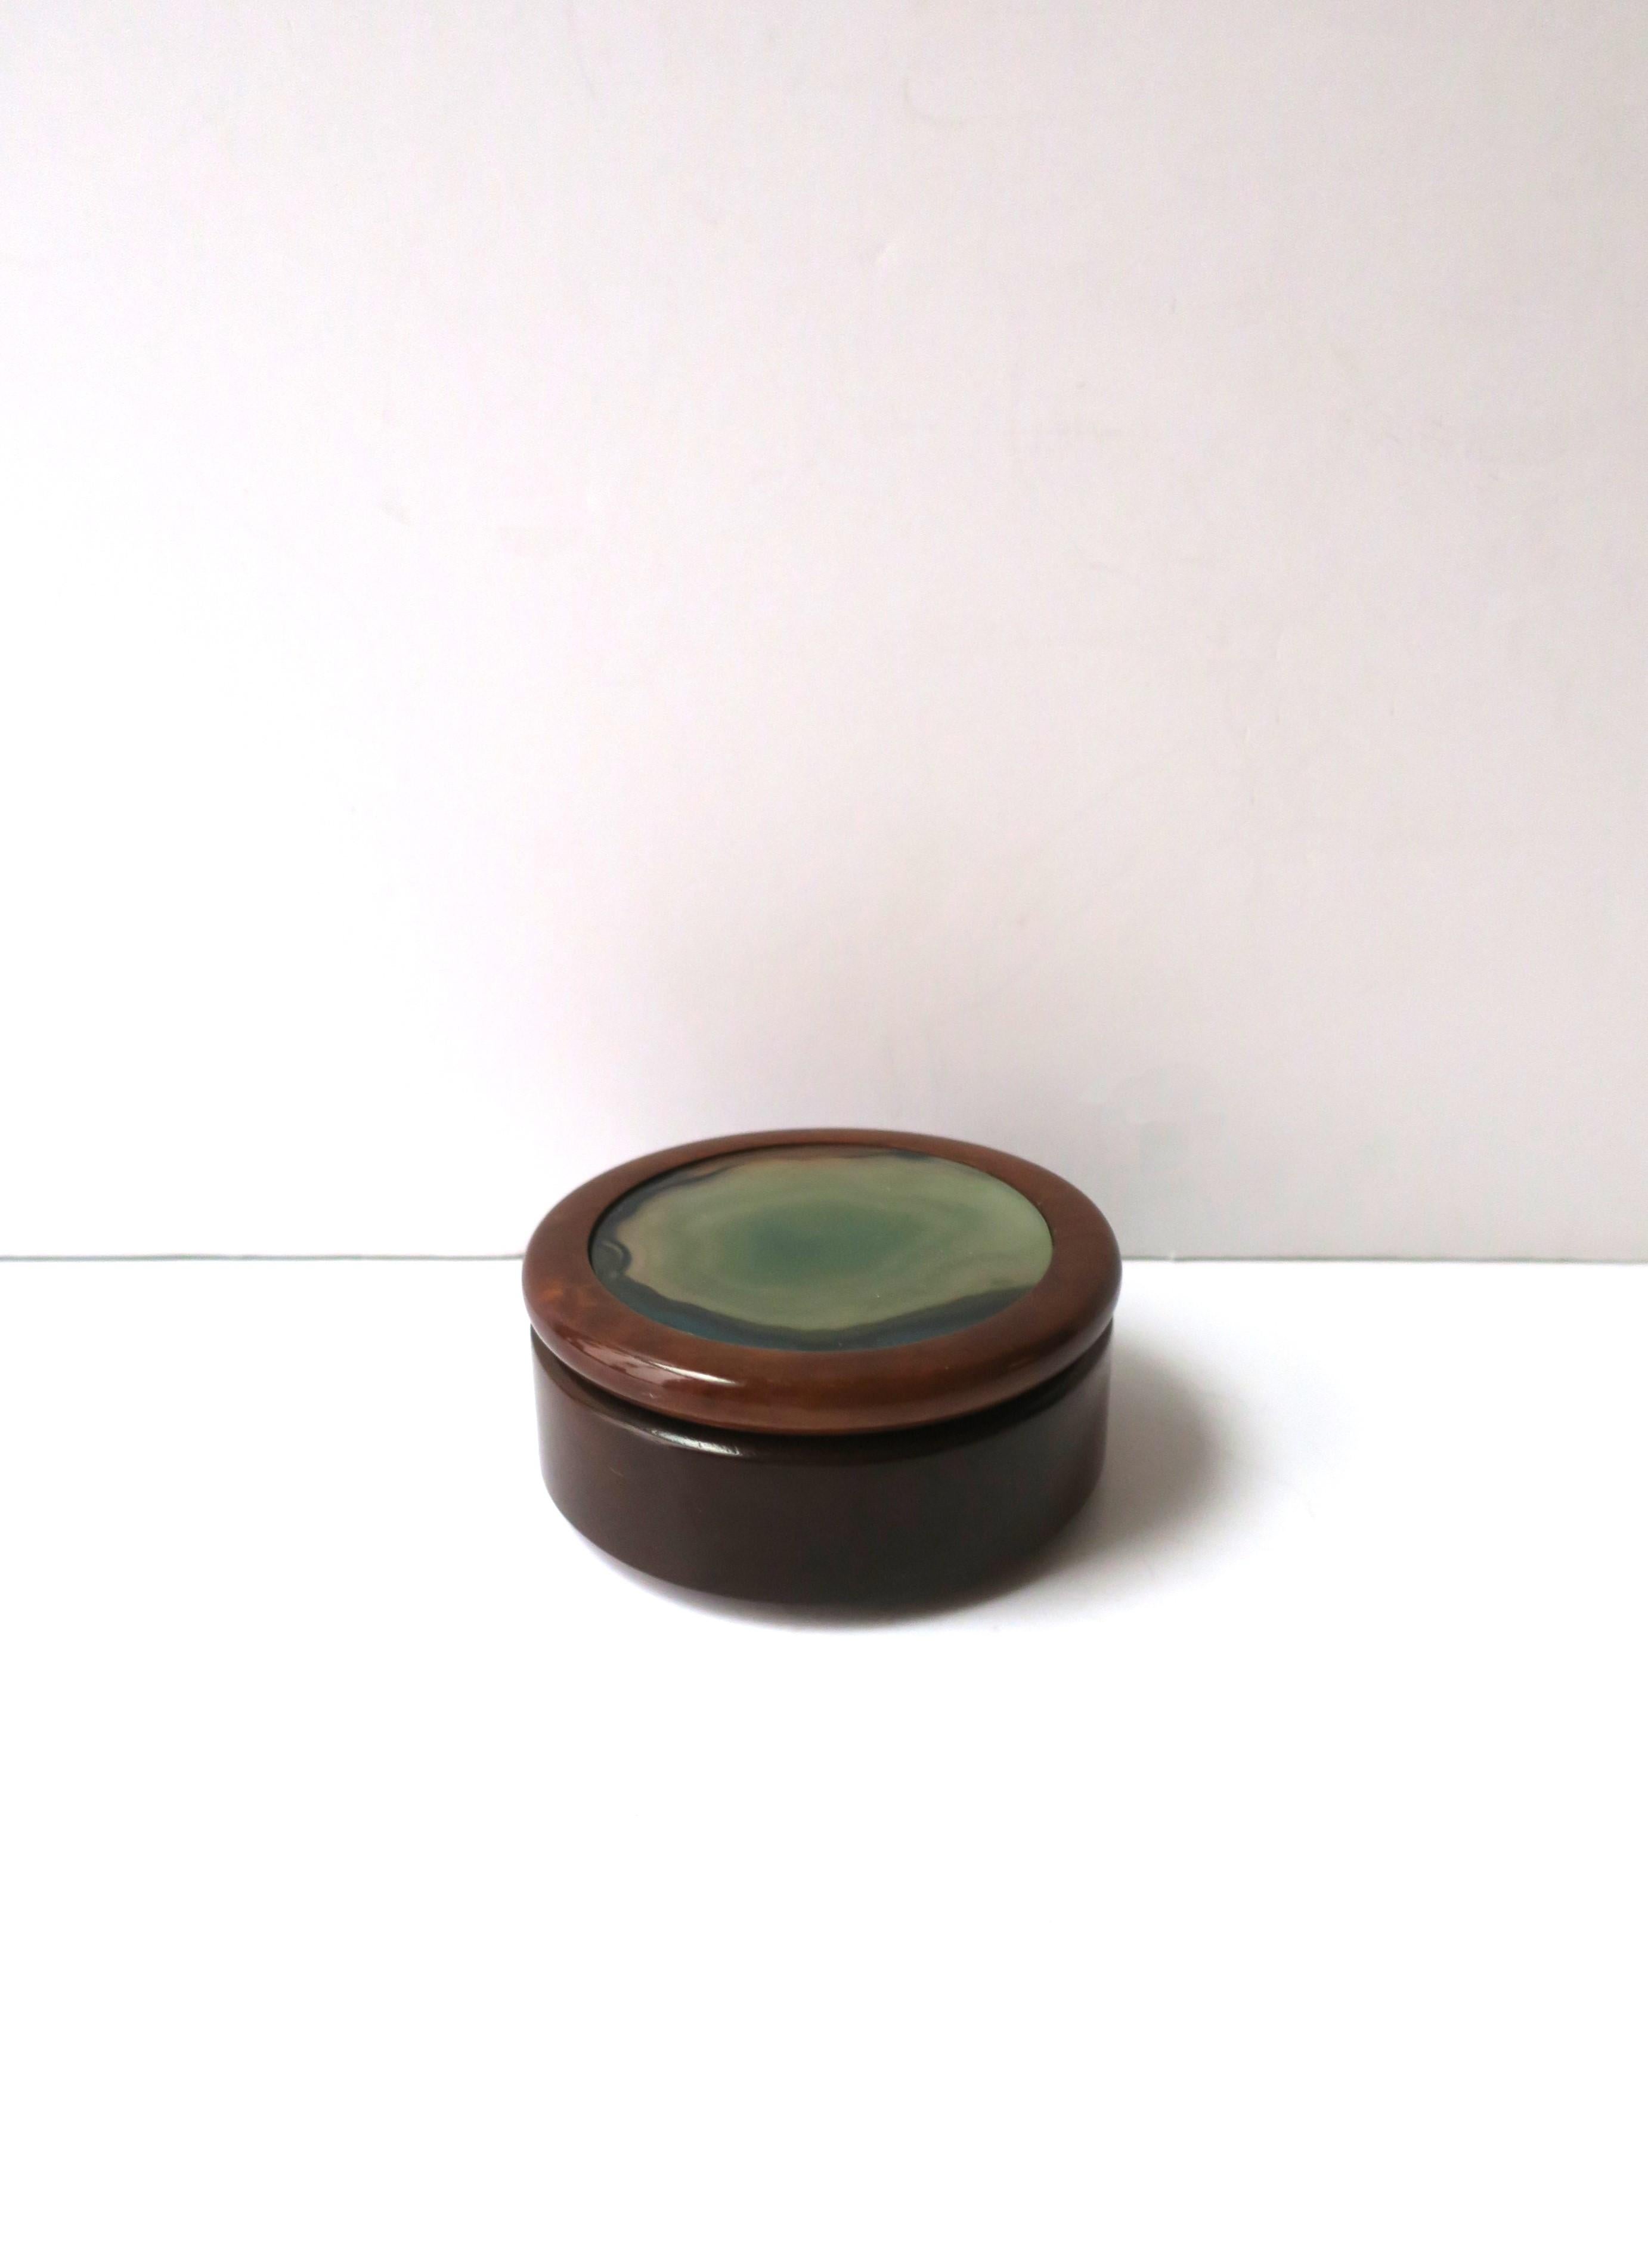 A Brazilian hardwood and agate onyx round jewelry or trinket box, in the Modern style or Post-Modern period, circa late-20th century, 1980s to early 1990s, Brazil. Box is a hardwood with a green agate onyx lid. Agate is a combination of greens -